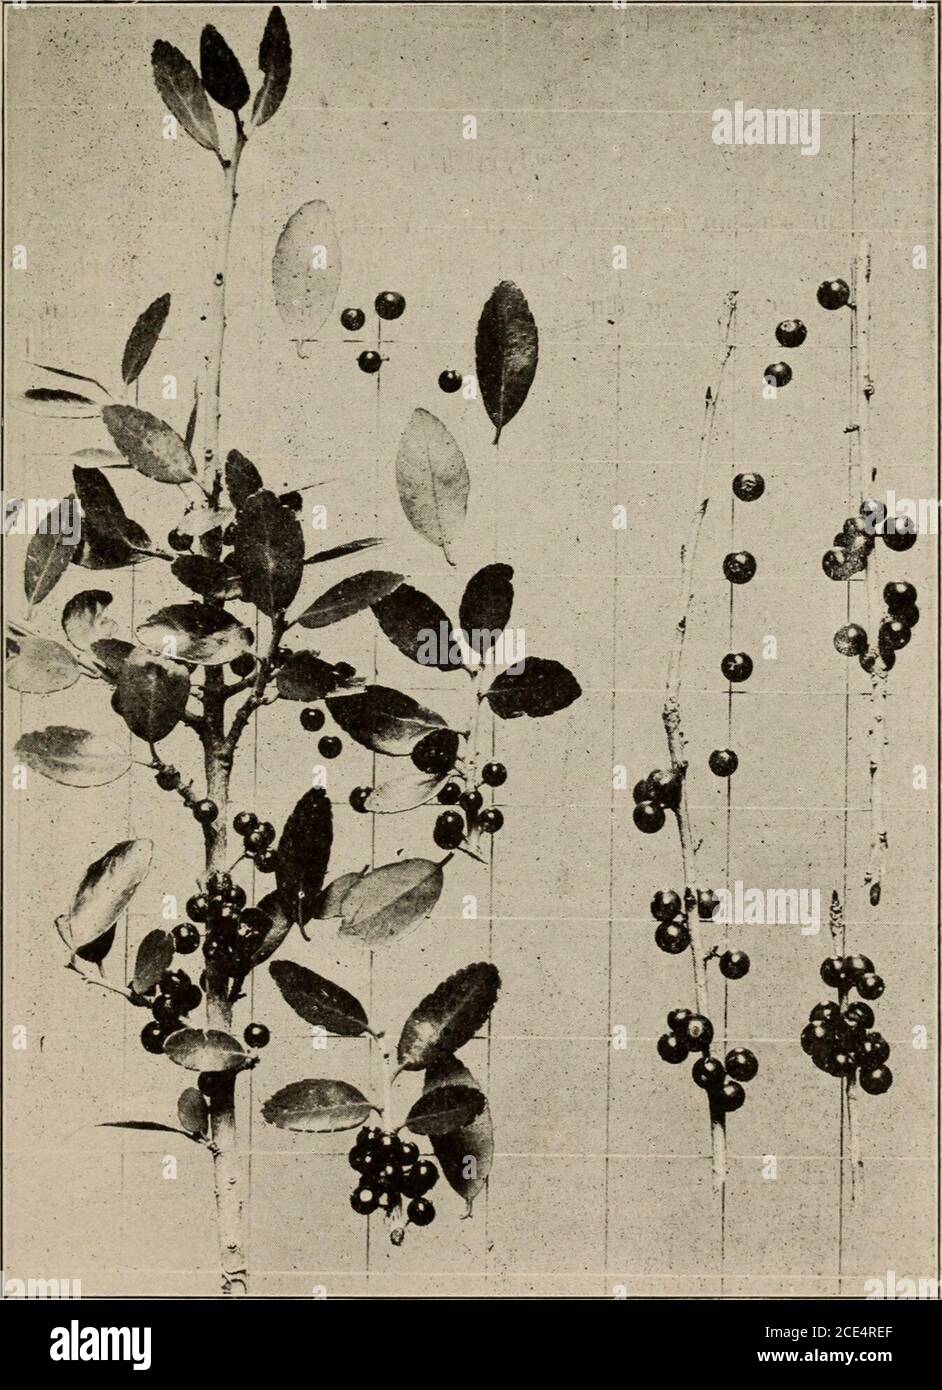 . Trees of Texas; an illustrated manual of the native and introduced trees of the state . with spiny toothed margin 1. I. opaca. b. Leaves serrate but not spiny 2. I. vomitoria. 2. Leaves deciduous 3. I. decidua. 1. Ilex opaca Alton. American Holly. A medium sizednarrow topped tree 40°-50° high with light gray roughenedbark. Leaves simple, alternate, 2-4 long, evergreen, stiffand leathery with spiny margin. Flowers small, in axillarycymes. Fruit a bright red drupe which persists throughoutthe winter. Emblematic of the Christmas season. Maine to Florida, west to eastern Texas and extending upth Stock Photo